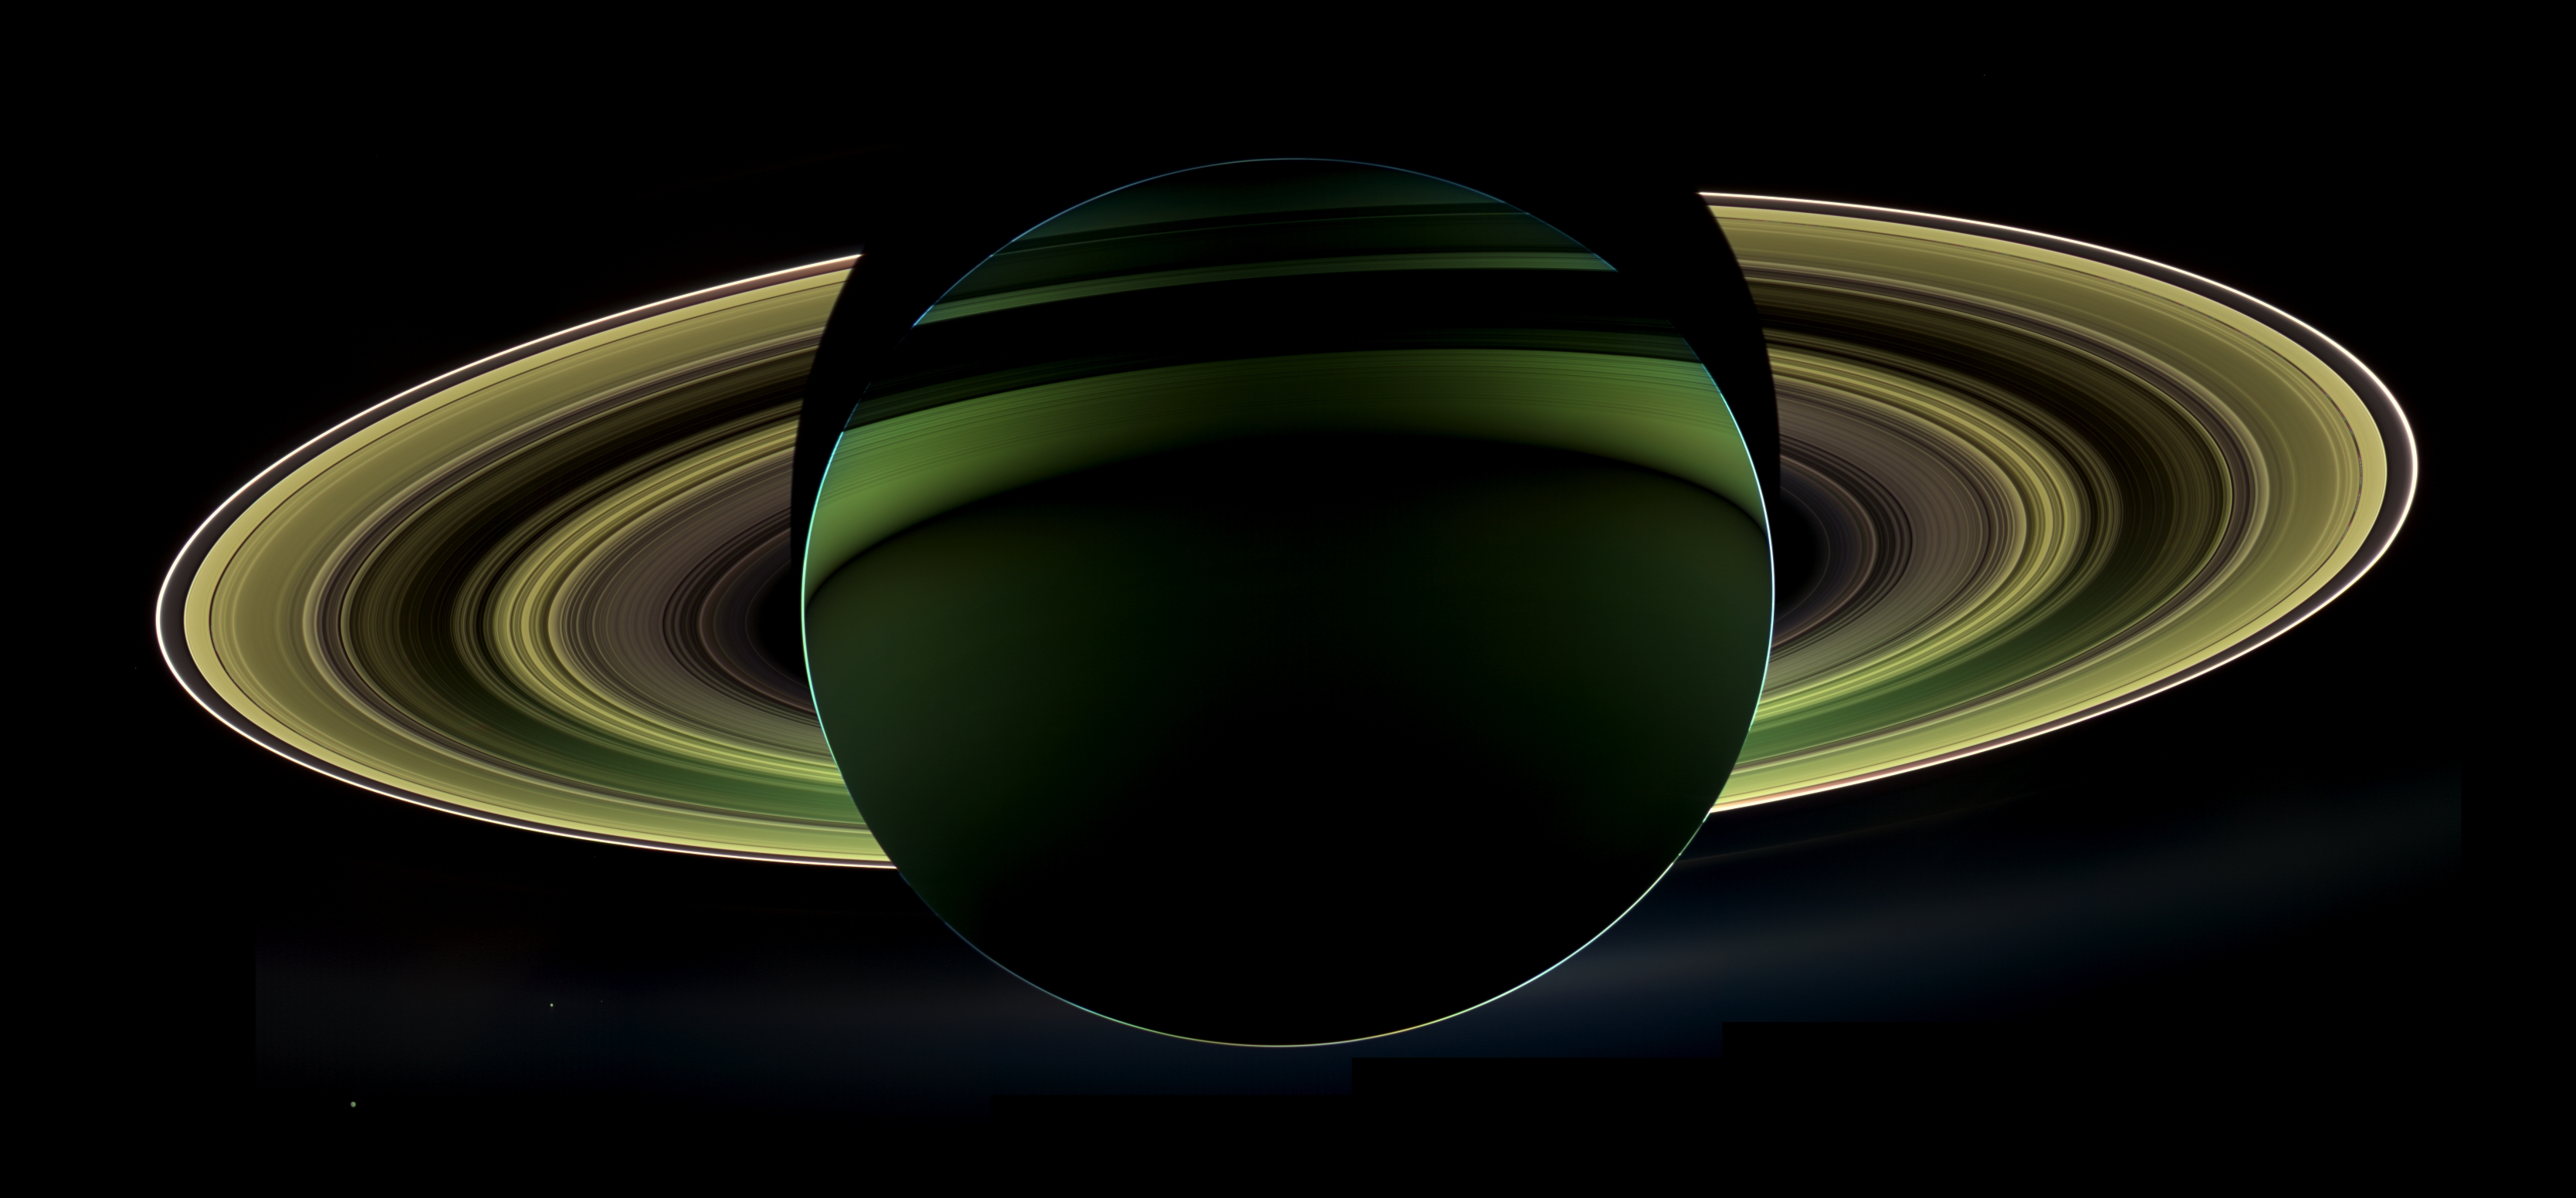 General 3336x1552 astronomy Saturn planetary rings planet Solar System